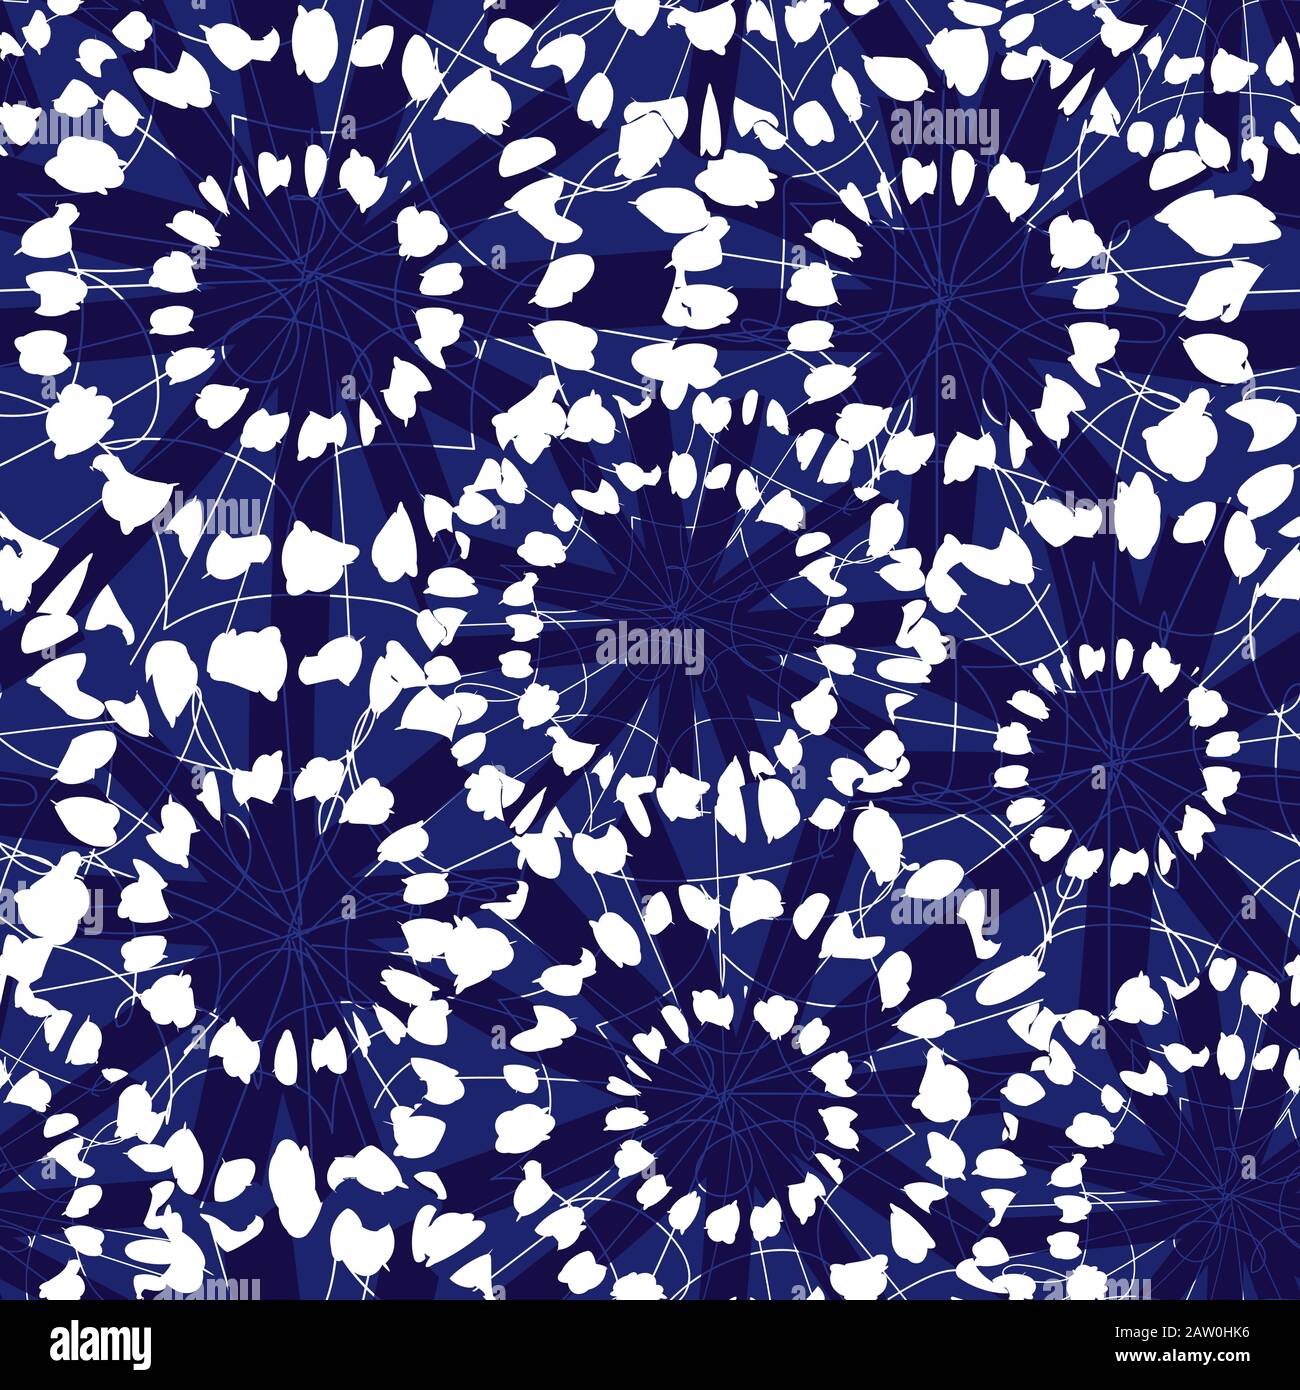 Vector blue and white abstract floral shibori circles overlap patten. Suitable for textile, gift wrap and wallpaper. Stock Vector